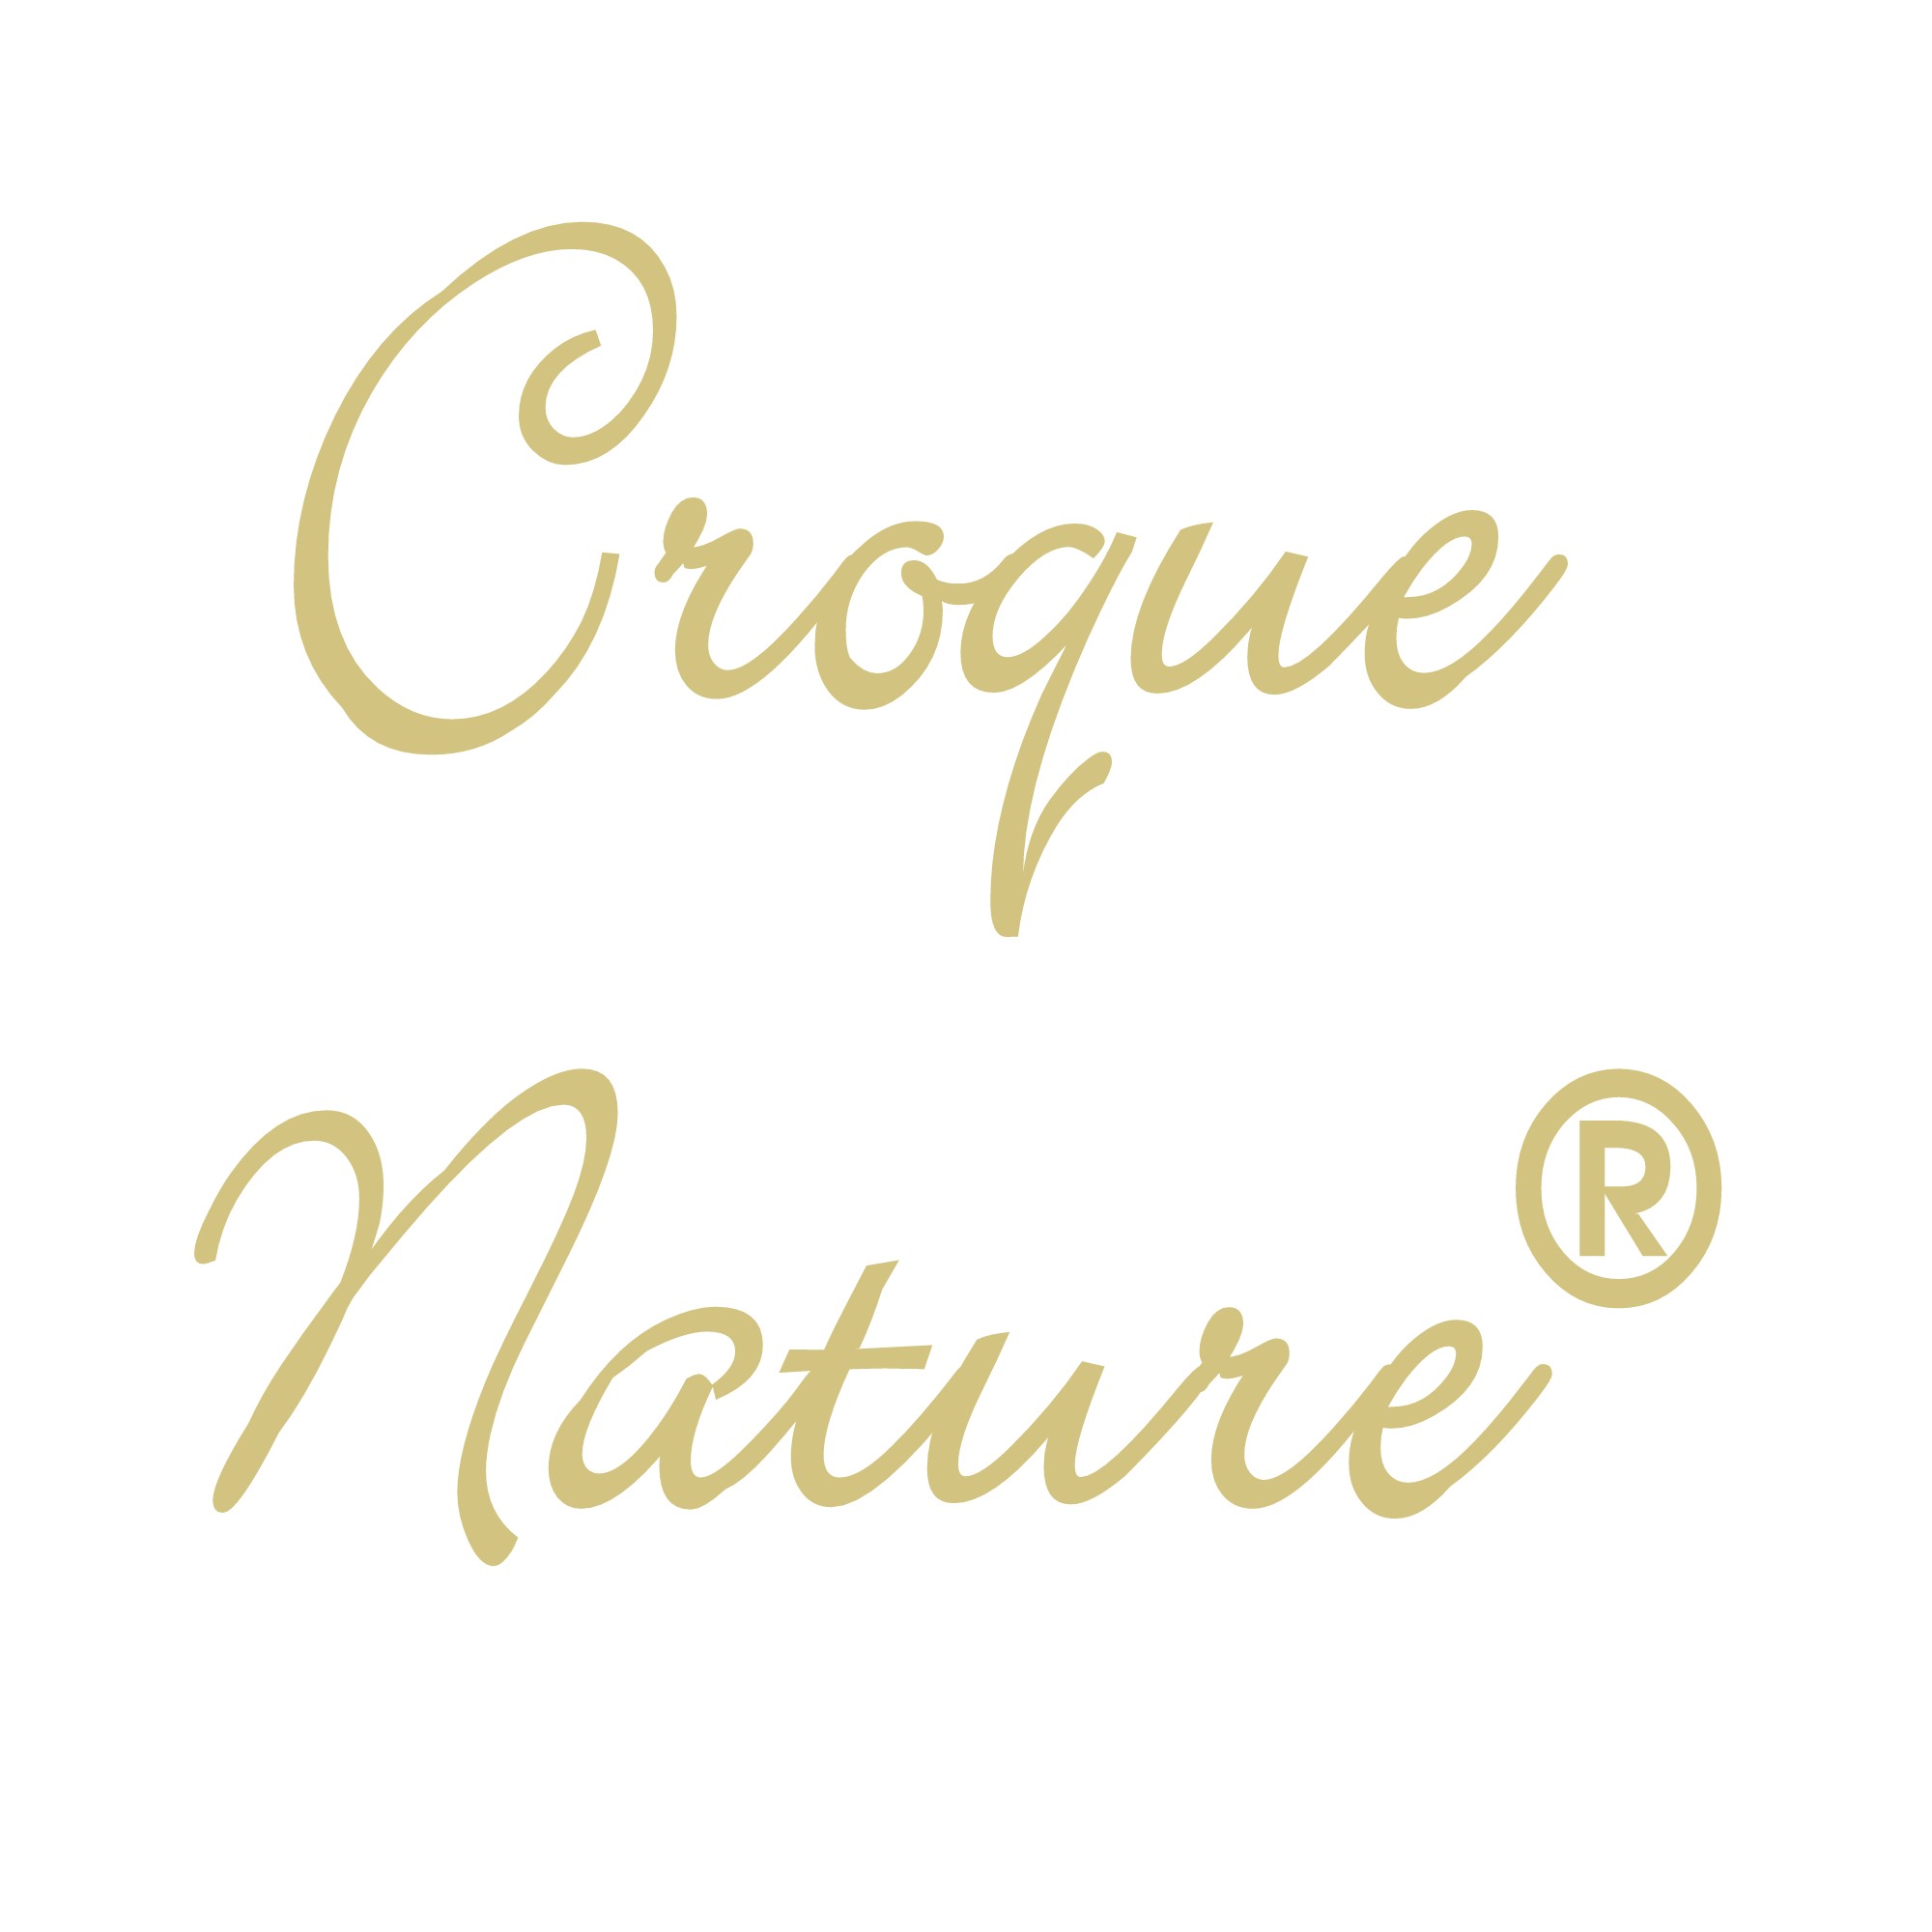 CROQUE NATURE® CHALLUY